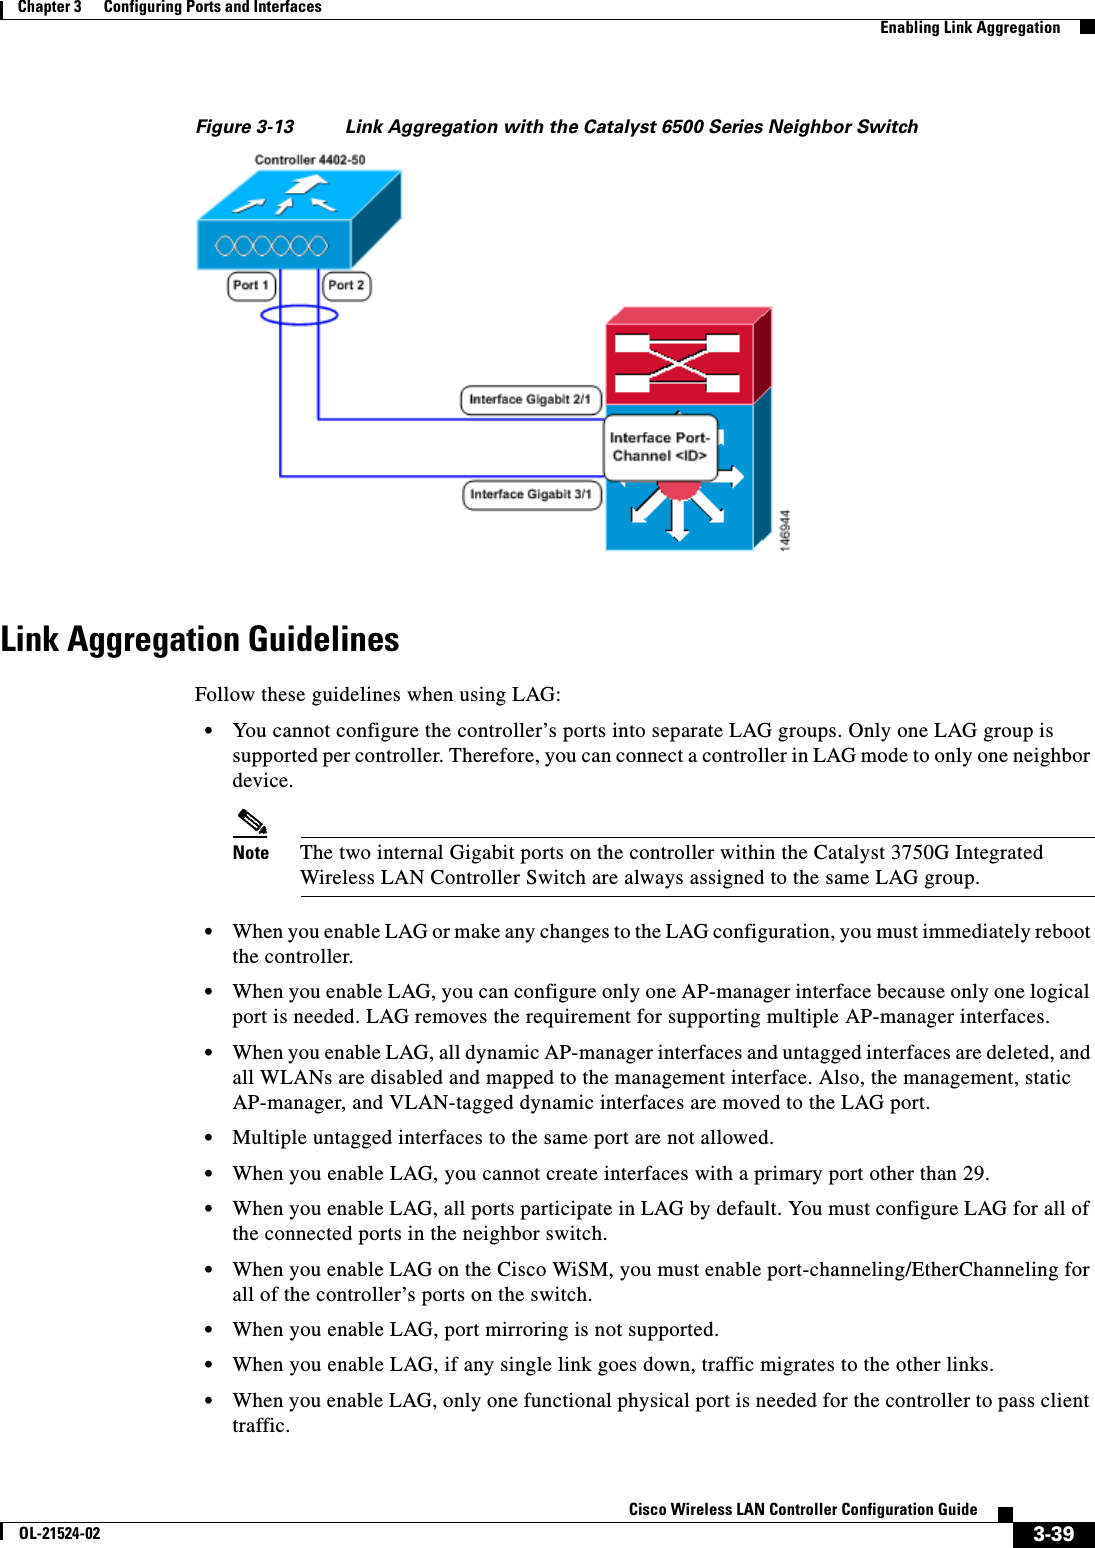  3-39Cisco Wireless LAN Controller Configuration GuideOL-21524-02Chapter 3      Configuring Ports and Interfaces  Enabling Link AggregationFigure 3-13 Link Aggregation with the Catalyst 6500 Series Neighbor SwitchLink Aggregation GuidelinesFollow these guidelines when using LAG:  • You cannot configure the controller’s ports into separate LAG groups. Only one LAG group is supported per controller. Therefore, you can connect a controller in LAG mode to only one neighbor device.Note The two internal Gigabit ports on the controller within the Catalyst 3750G Integrated Wireless LAN Controller Switch are always assigned to the same LAG group.  • When you enable LAG or make any changes to the LAG configuration, you must immediately reboot the controller.  • When you enable LAG, you can configure only one AP-manager interface because only one logical port is needed. LAG removes the requirement for supporting multiple AP-manager interfaces.  • When you enable LAG, all dynamic AP-manager interfaces and untagged interfaces are deleted, and all WLANs are disabled and mapped to the management interface. Also, the management, static AP-manager, and VLAN-tagged dynamic interfaces are moved to the LAG port.  • Multiple untagged interfaces to the same port are not allowed.  • When you enable LAG, you cannot create interfaces with a primary port other than 29.  • When you enable LAG, all ports participate in LAG by default. You must configure LAG for all of the connected ports in the neighbor switch.  • When you enable LAG on the Cisco WiSM, you must enable port-channeling/EtherChanneling for all of the controller’s ports on the switch.  • When you enable LAG, port mirroring is not supported.  • When you enable LAG, if any single link goes down, traffic migrates to the other links.  • When you enable LAG, only one functional physical port is needed for the controller to pass client traffic.